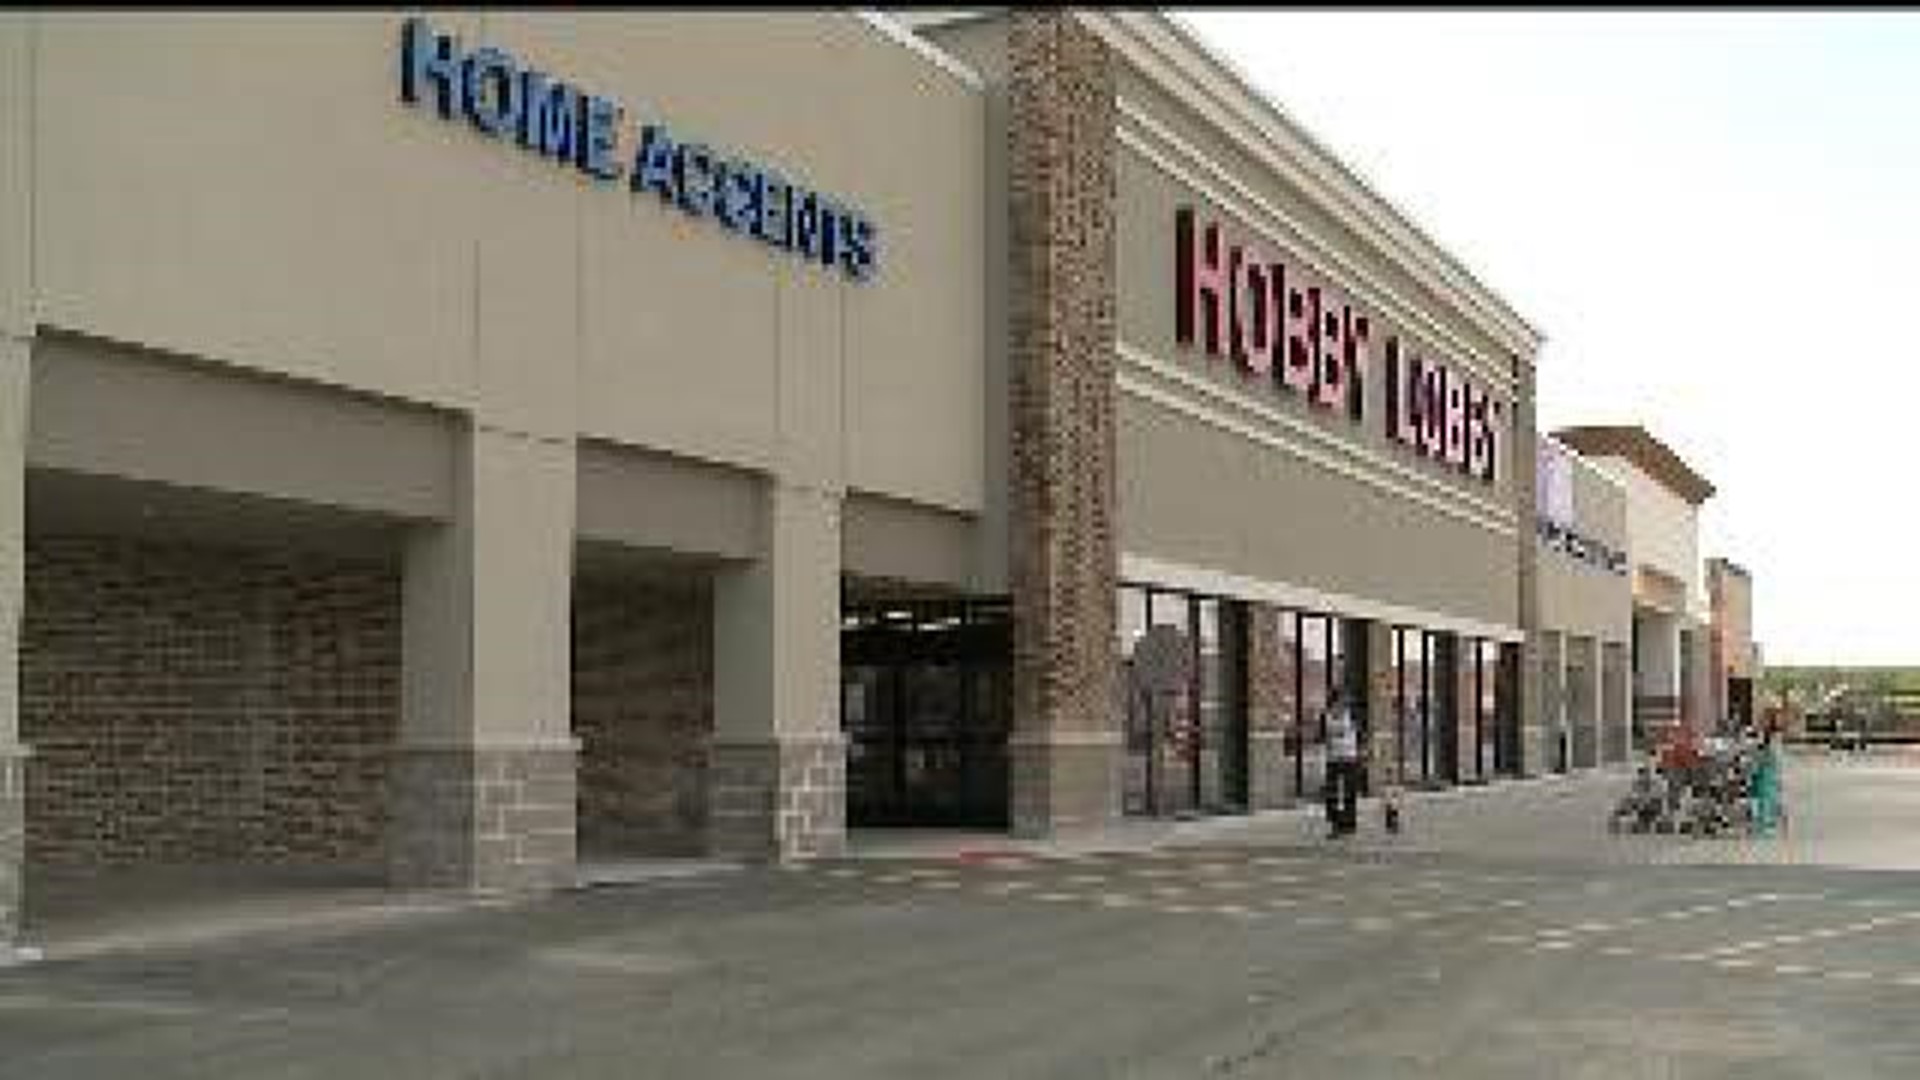 Opening Day for Hobby Lobby